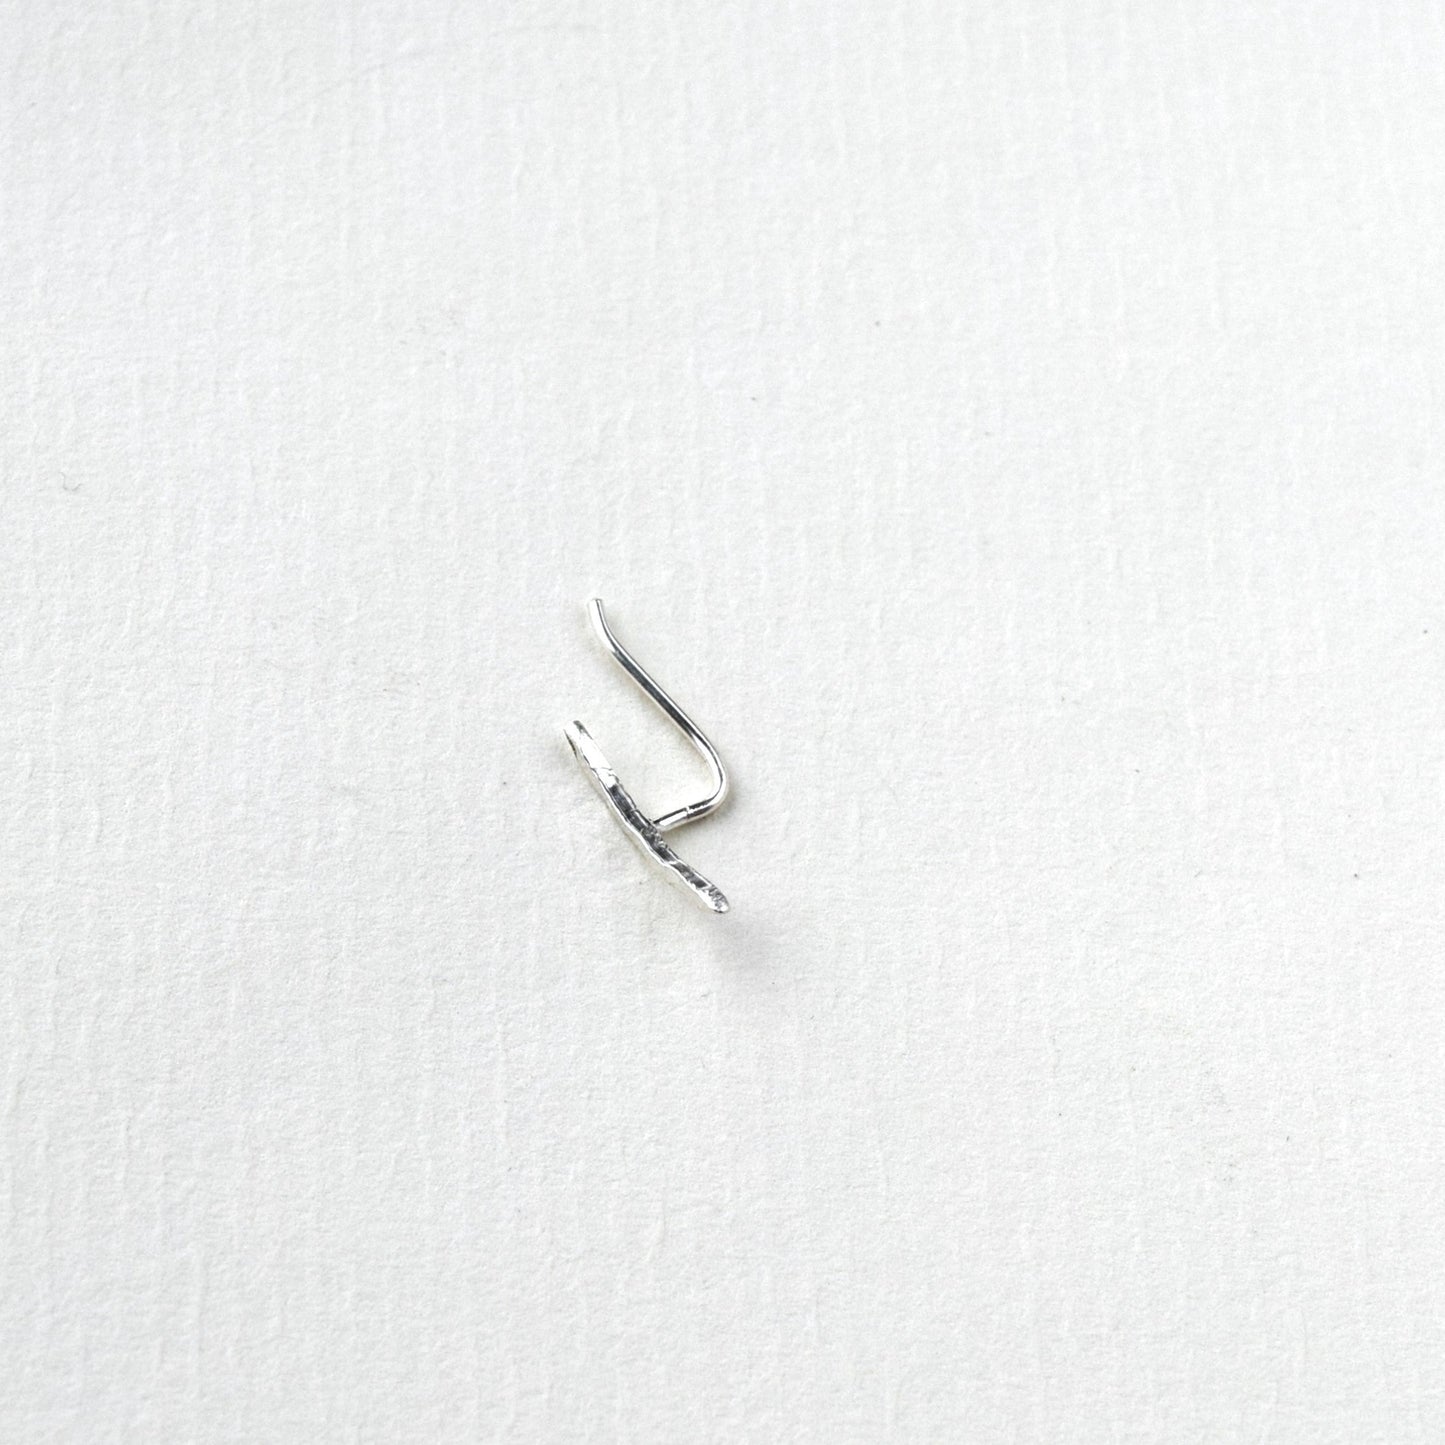 MUKA studio hammered silver curved helix stud with elongated pin back